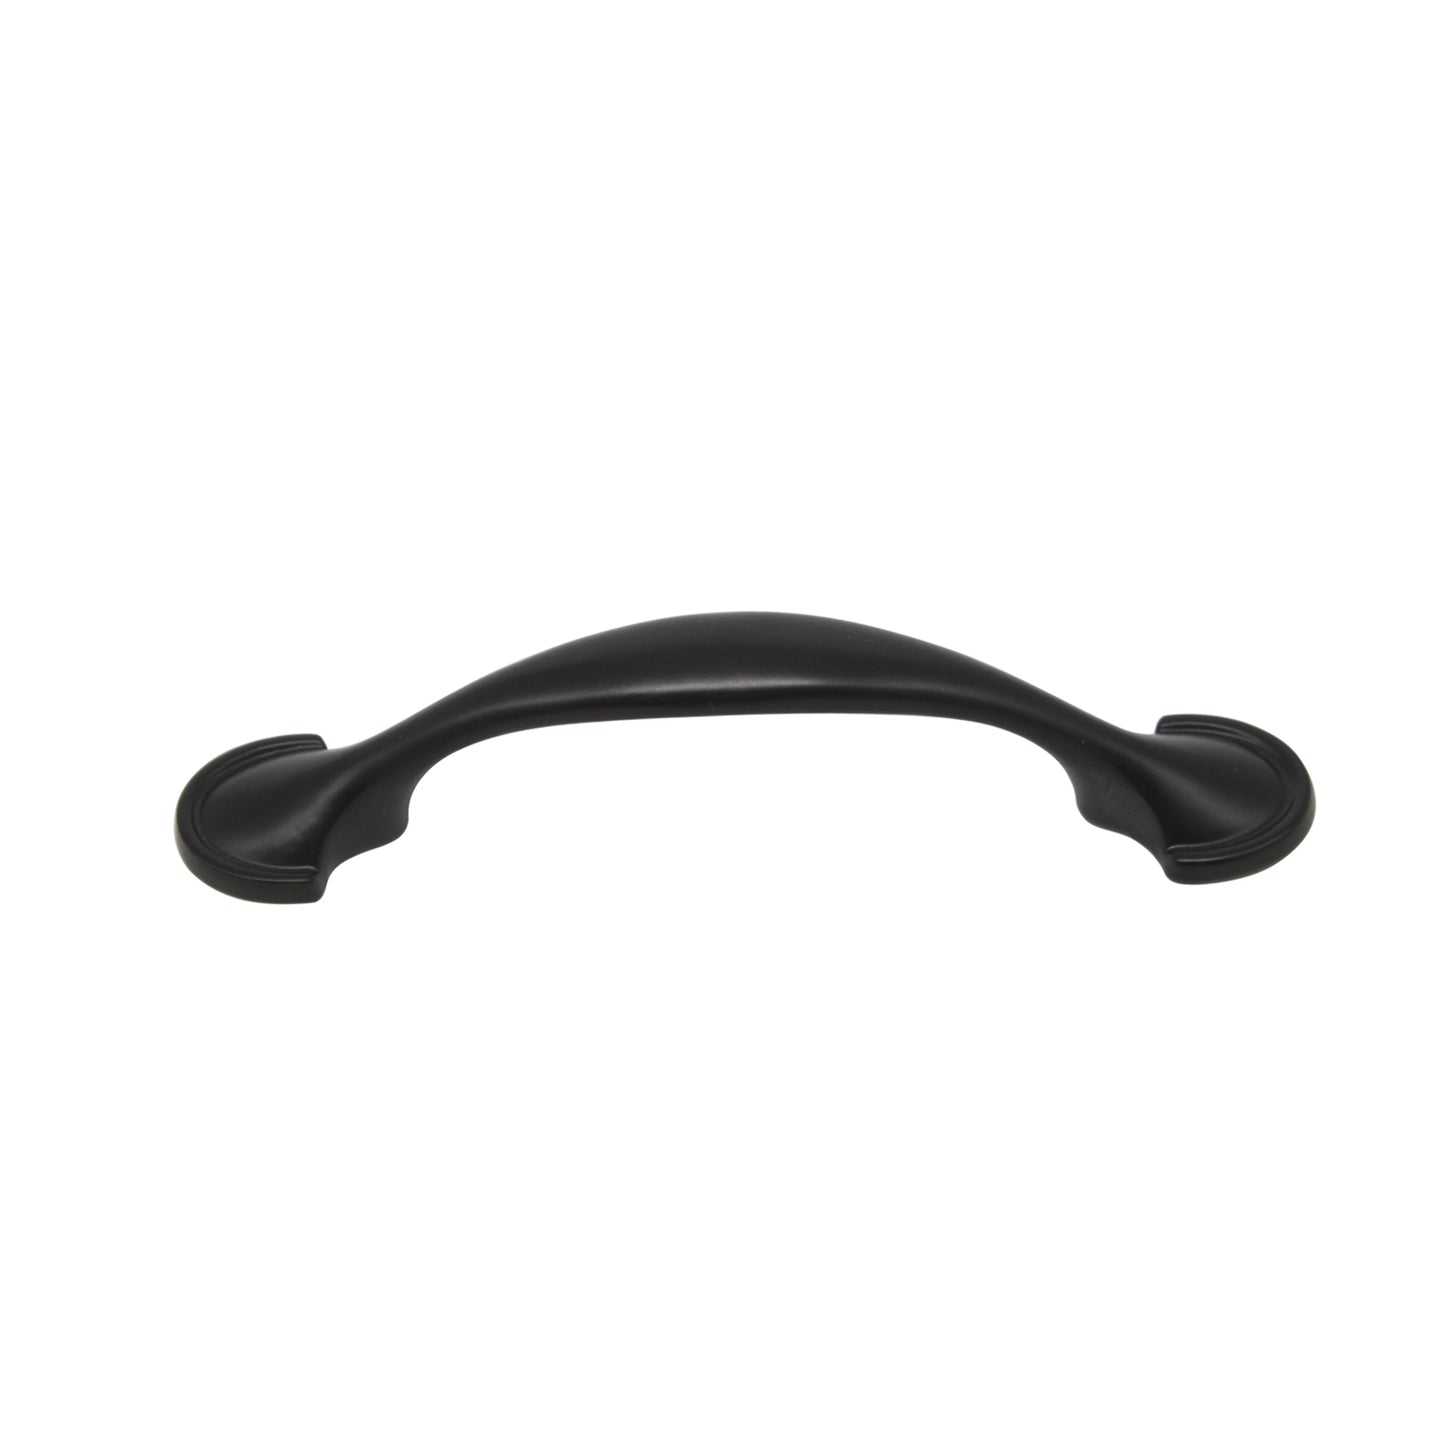 Black Finish 76mm 3inch Hile Centers Cabinet Handle Pull with Round Footed PD3167BK76 - Probrico